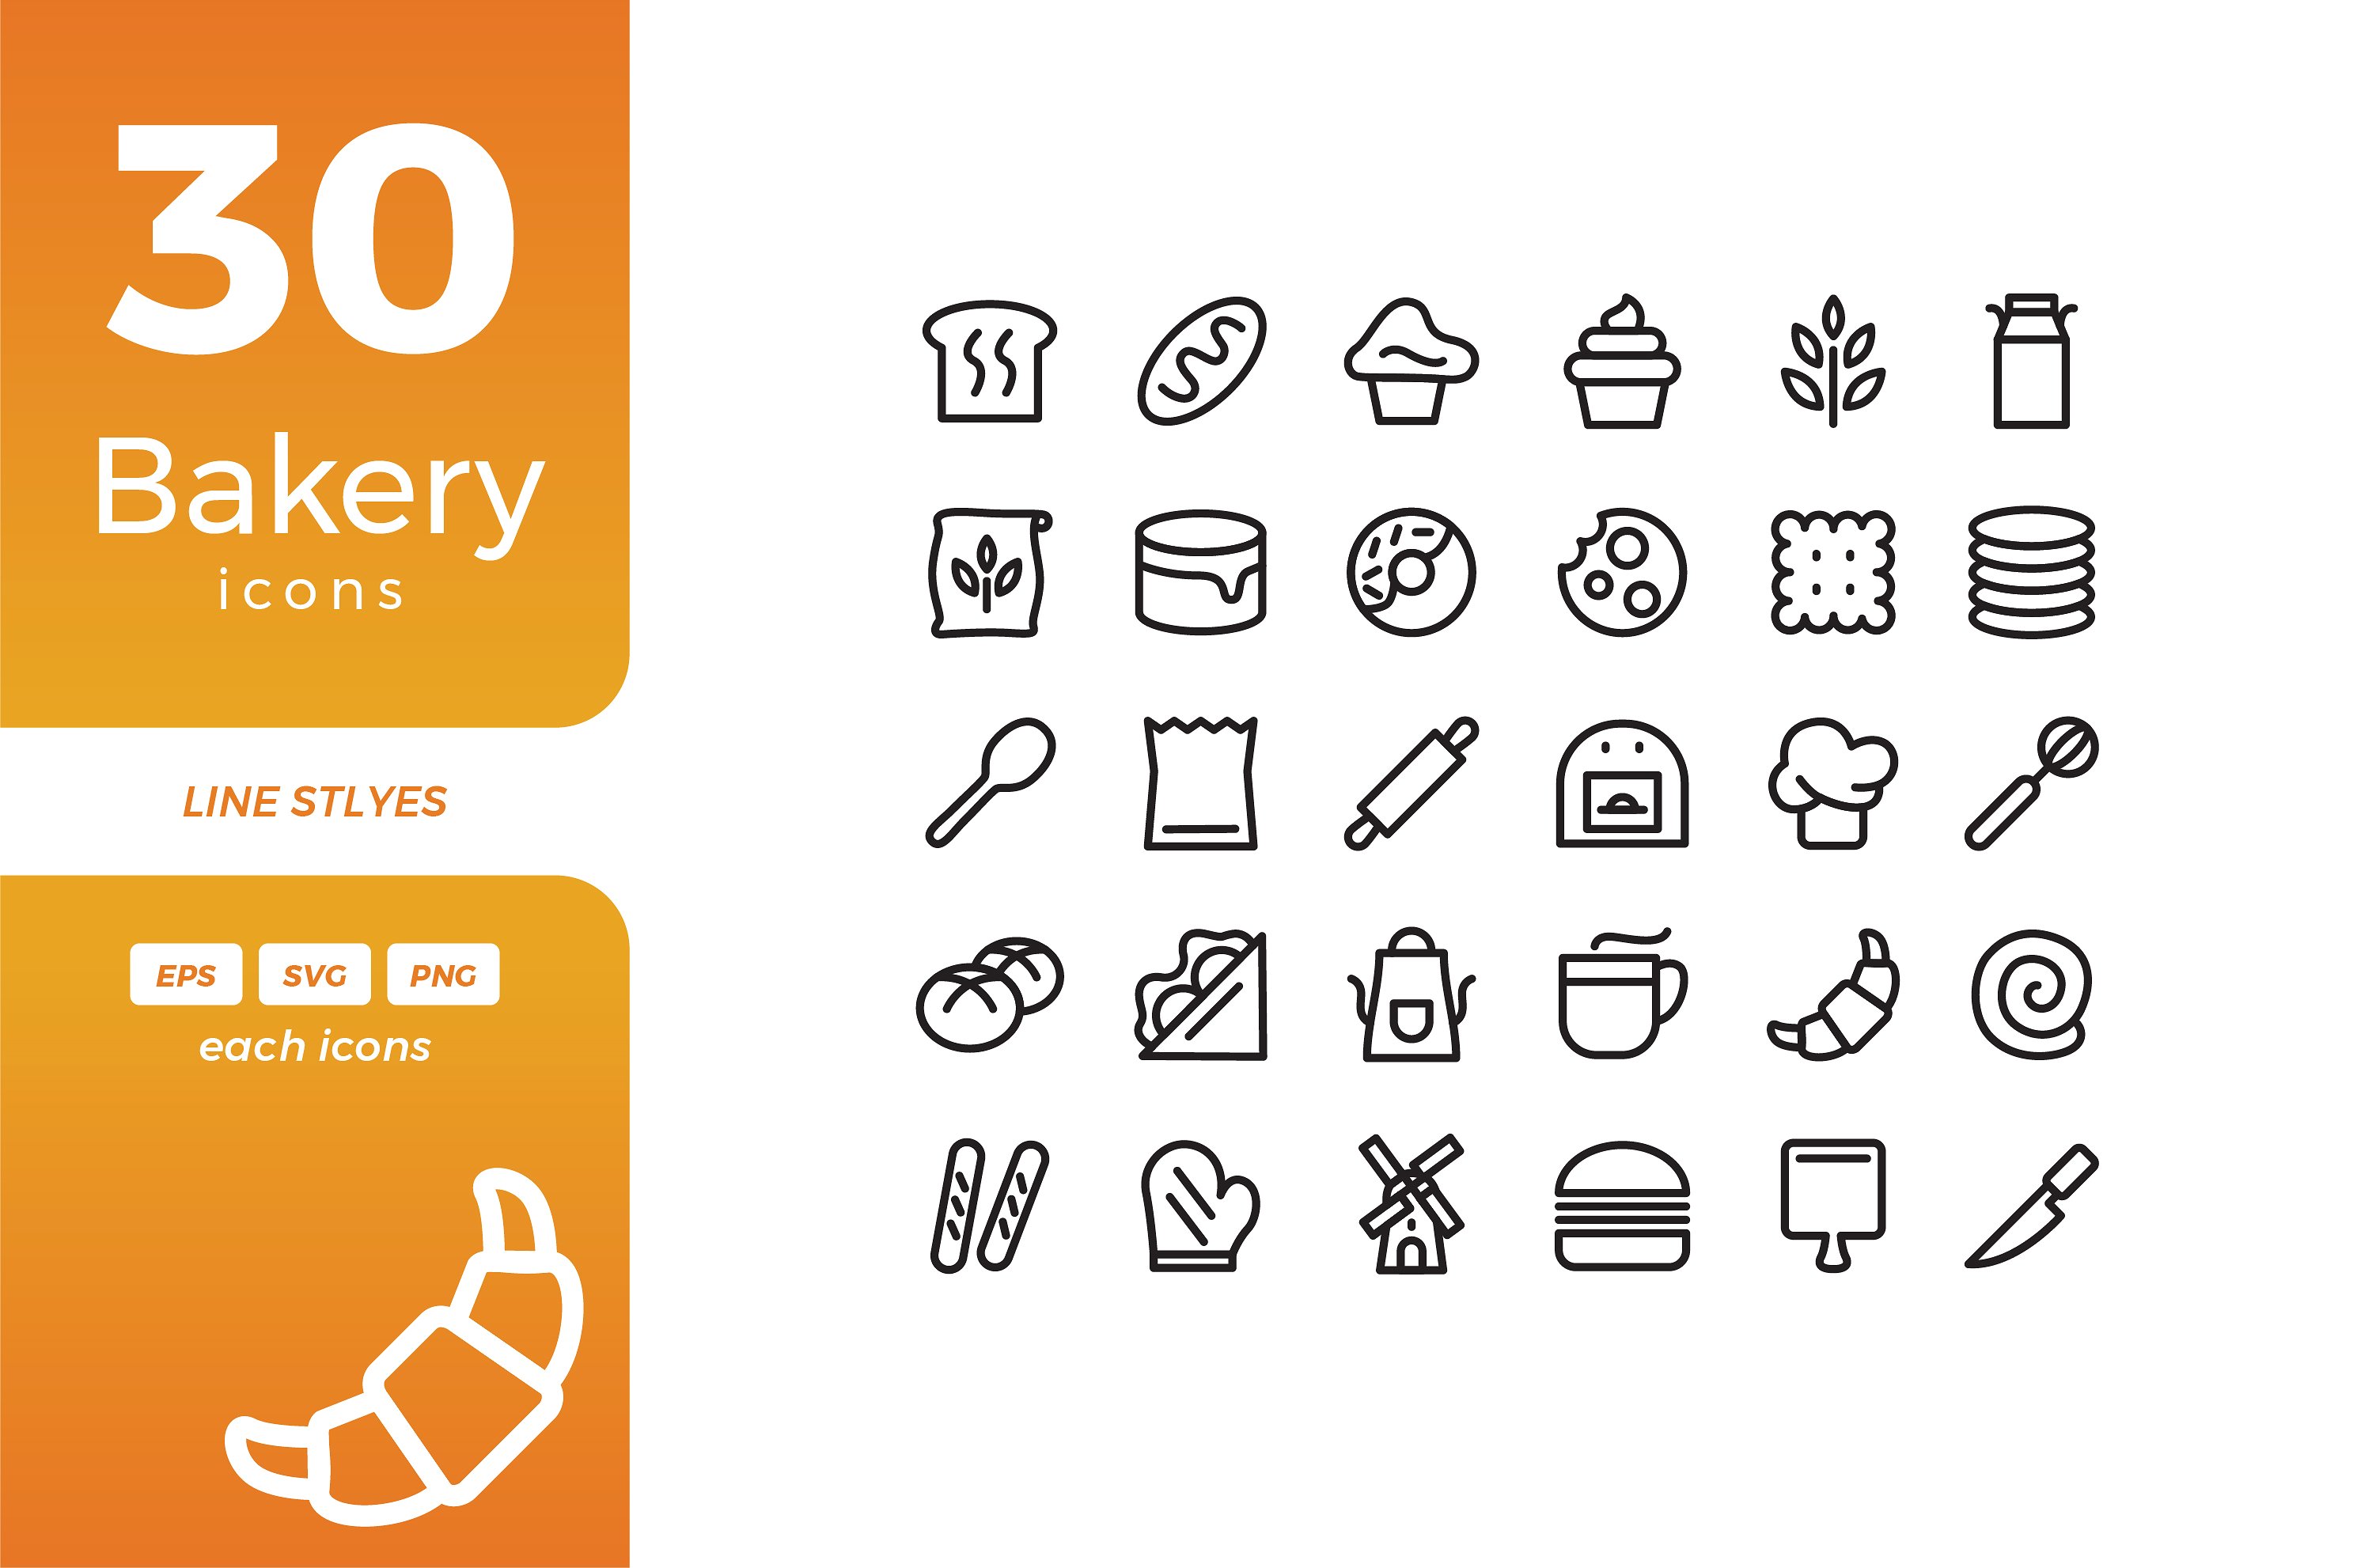 A bunch of bakery line icons